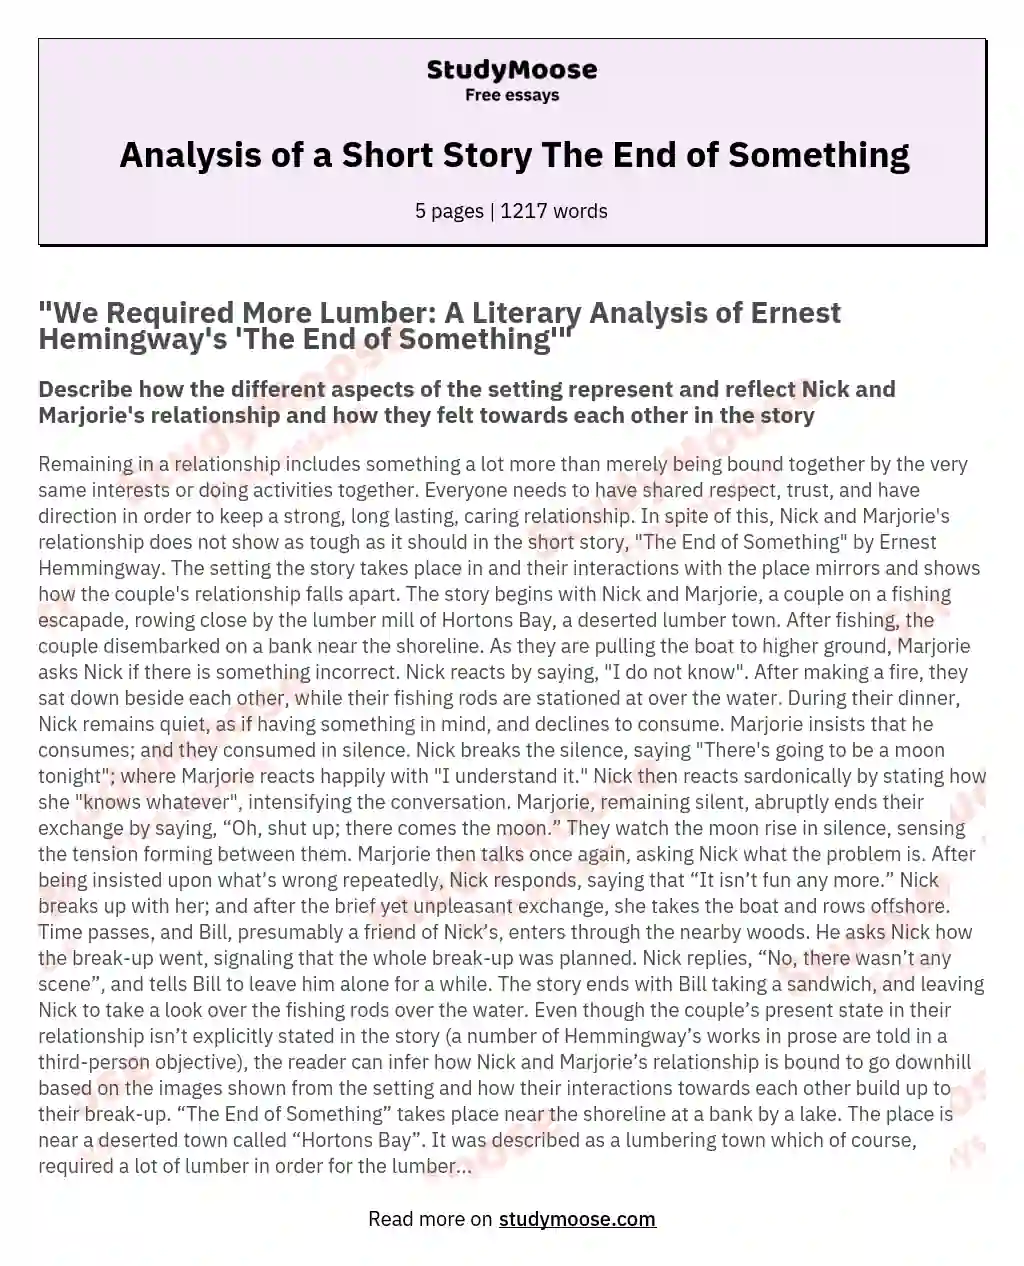 Analysis of a Short Story The End of Something